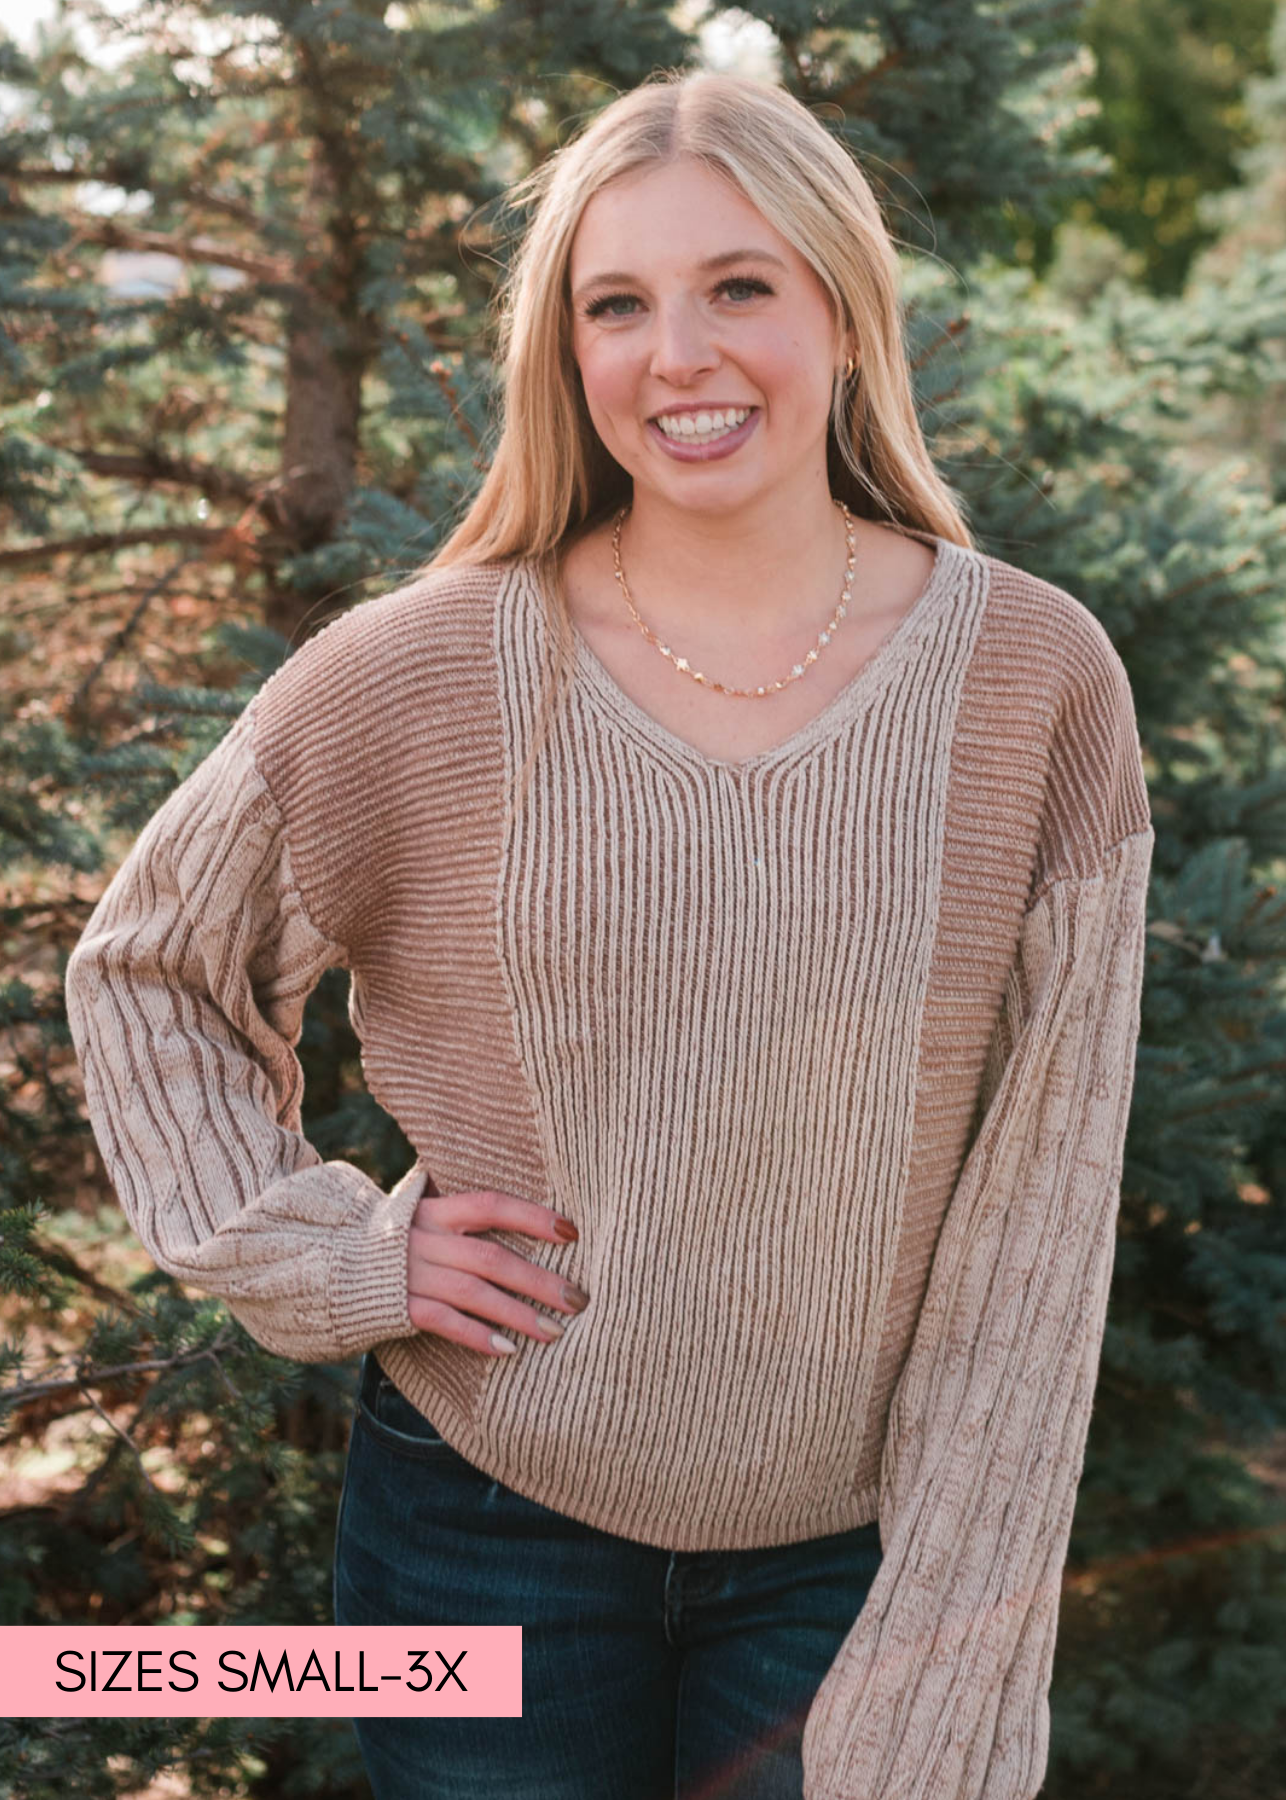 Long sleeve taupe sweater with a v-neck